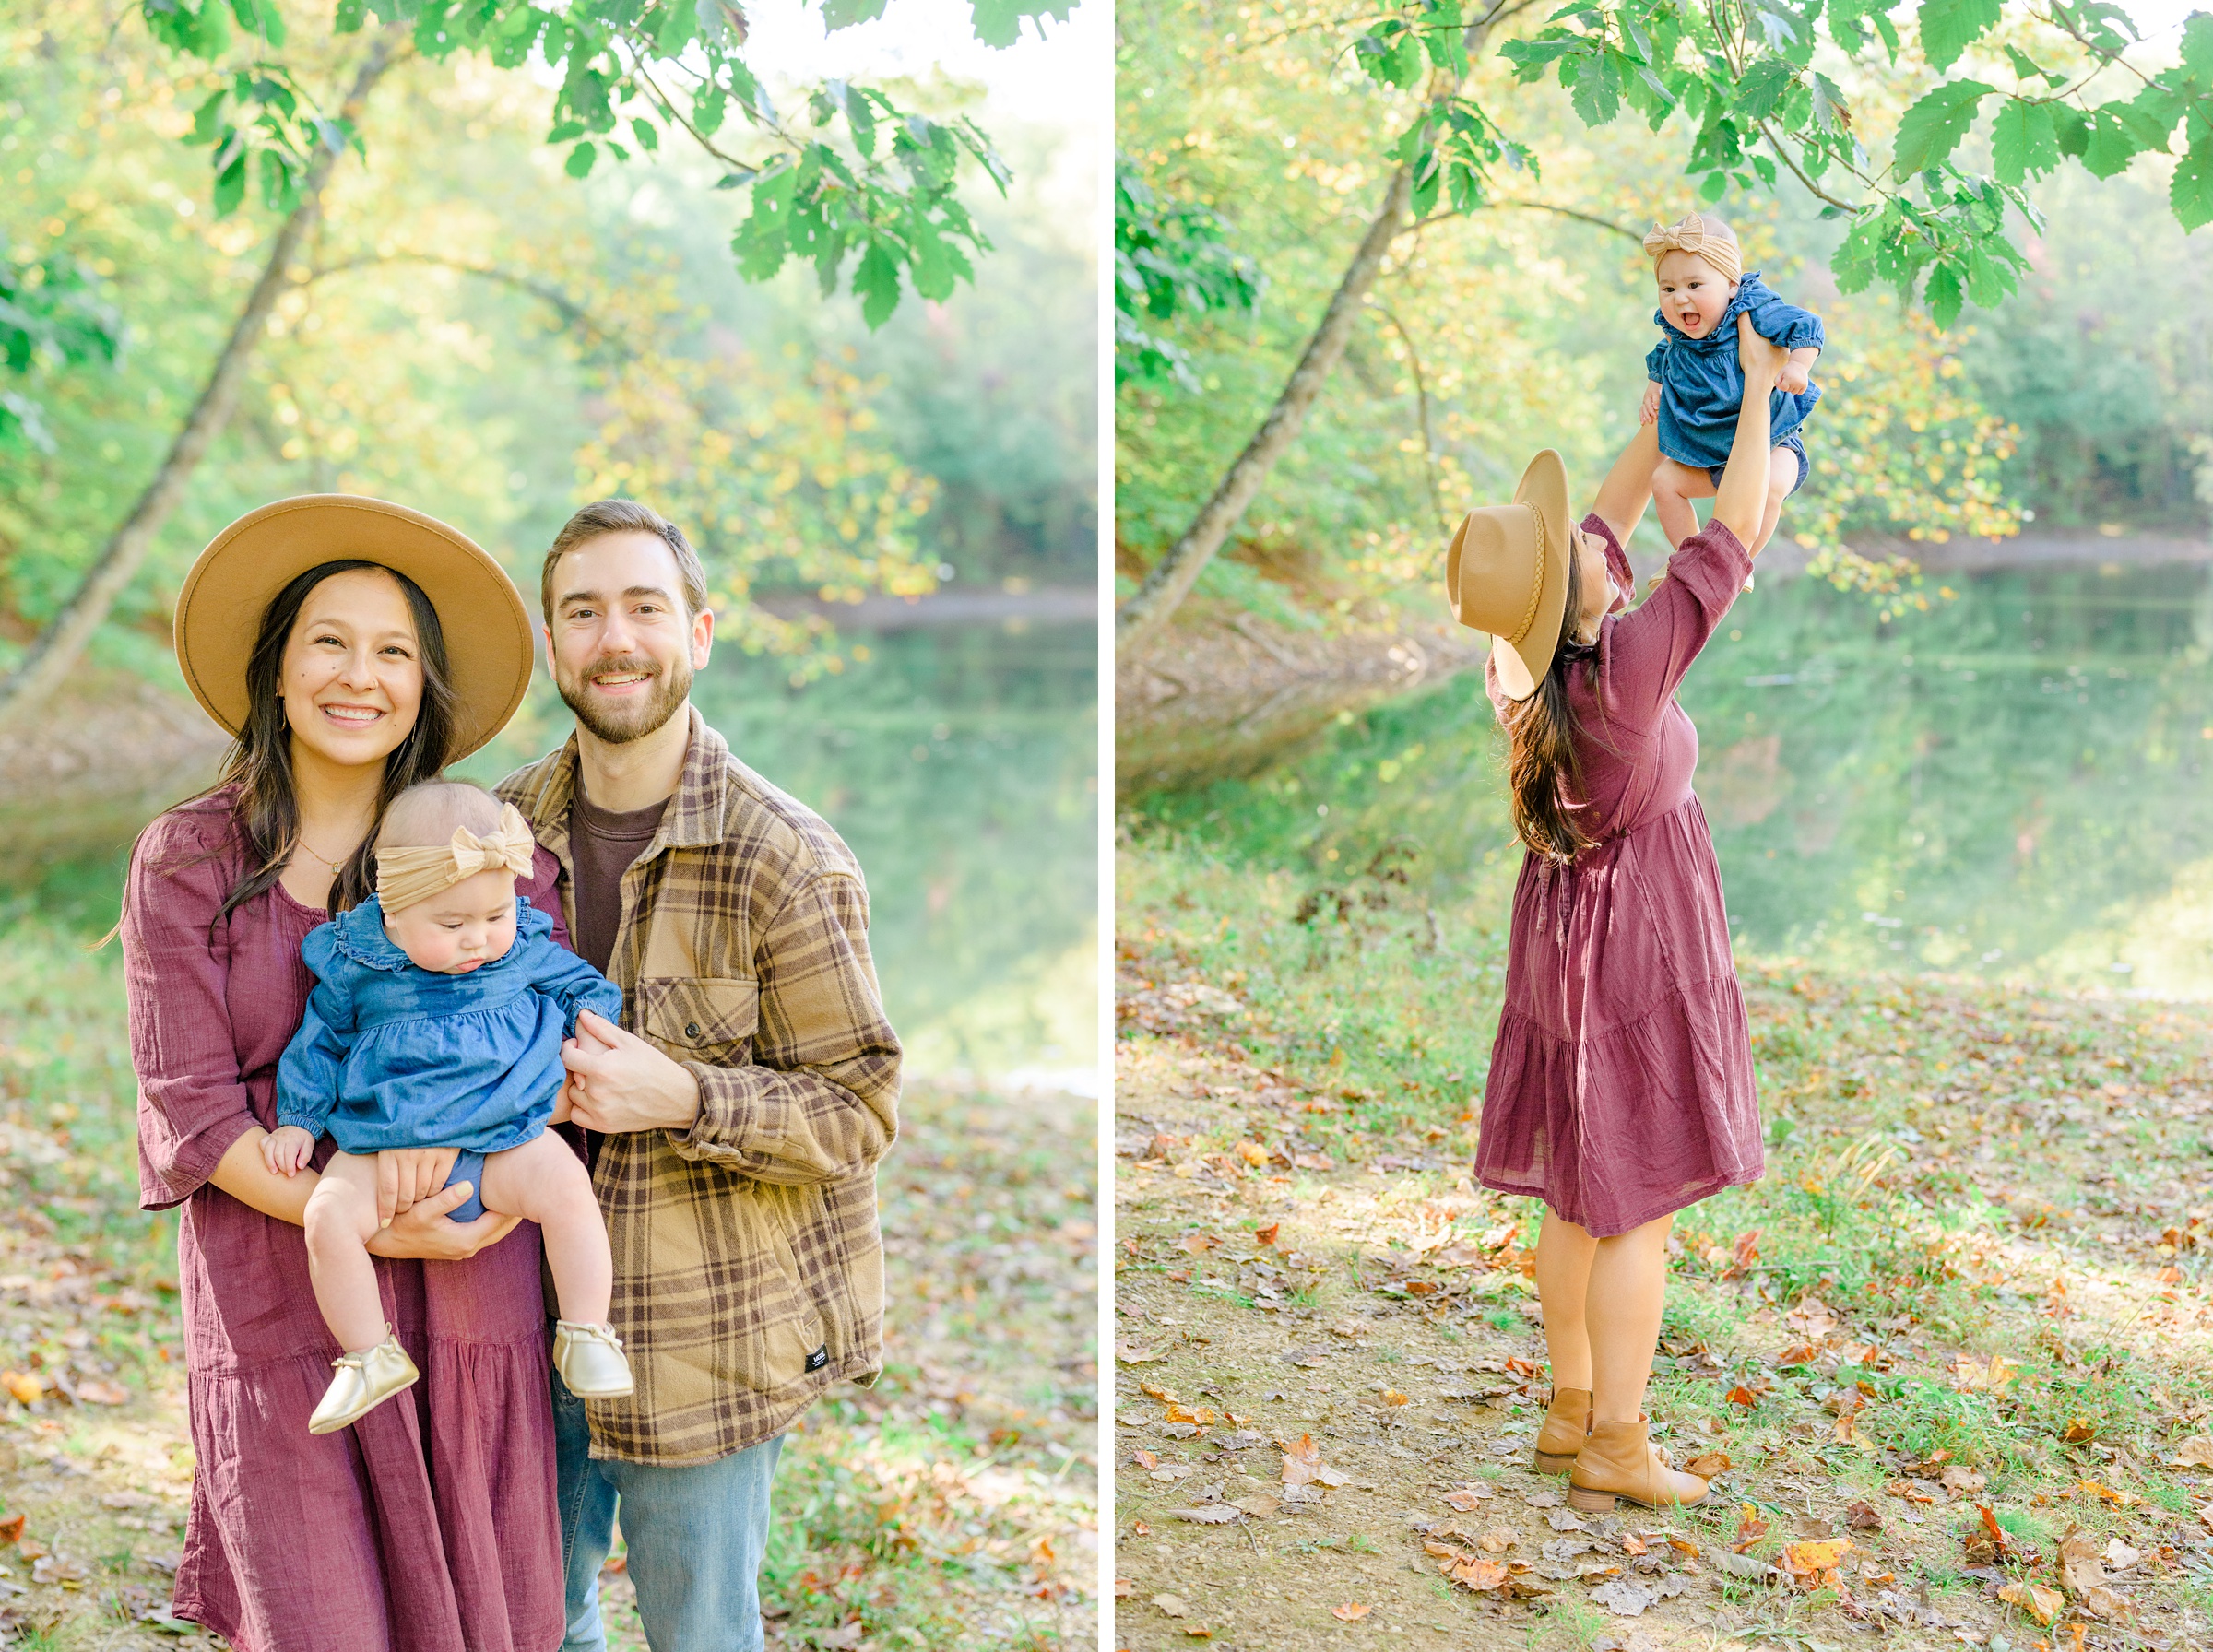 Family photo session in Hunt Valley, MD photographed by Baltimore Portrait Photographer Cait Kramer.